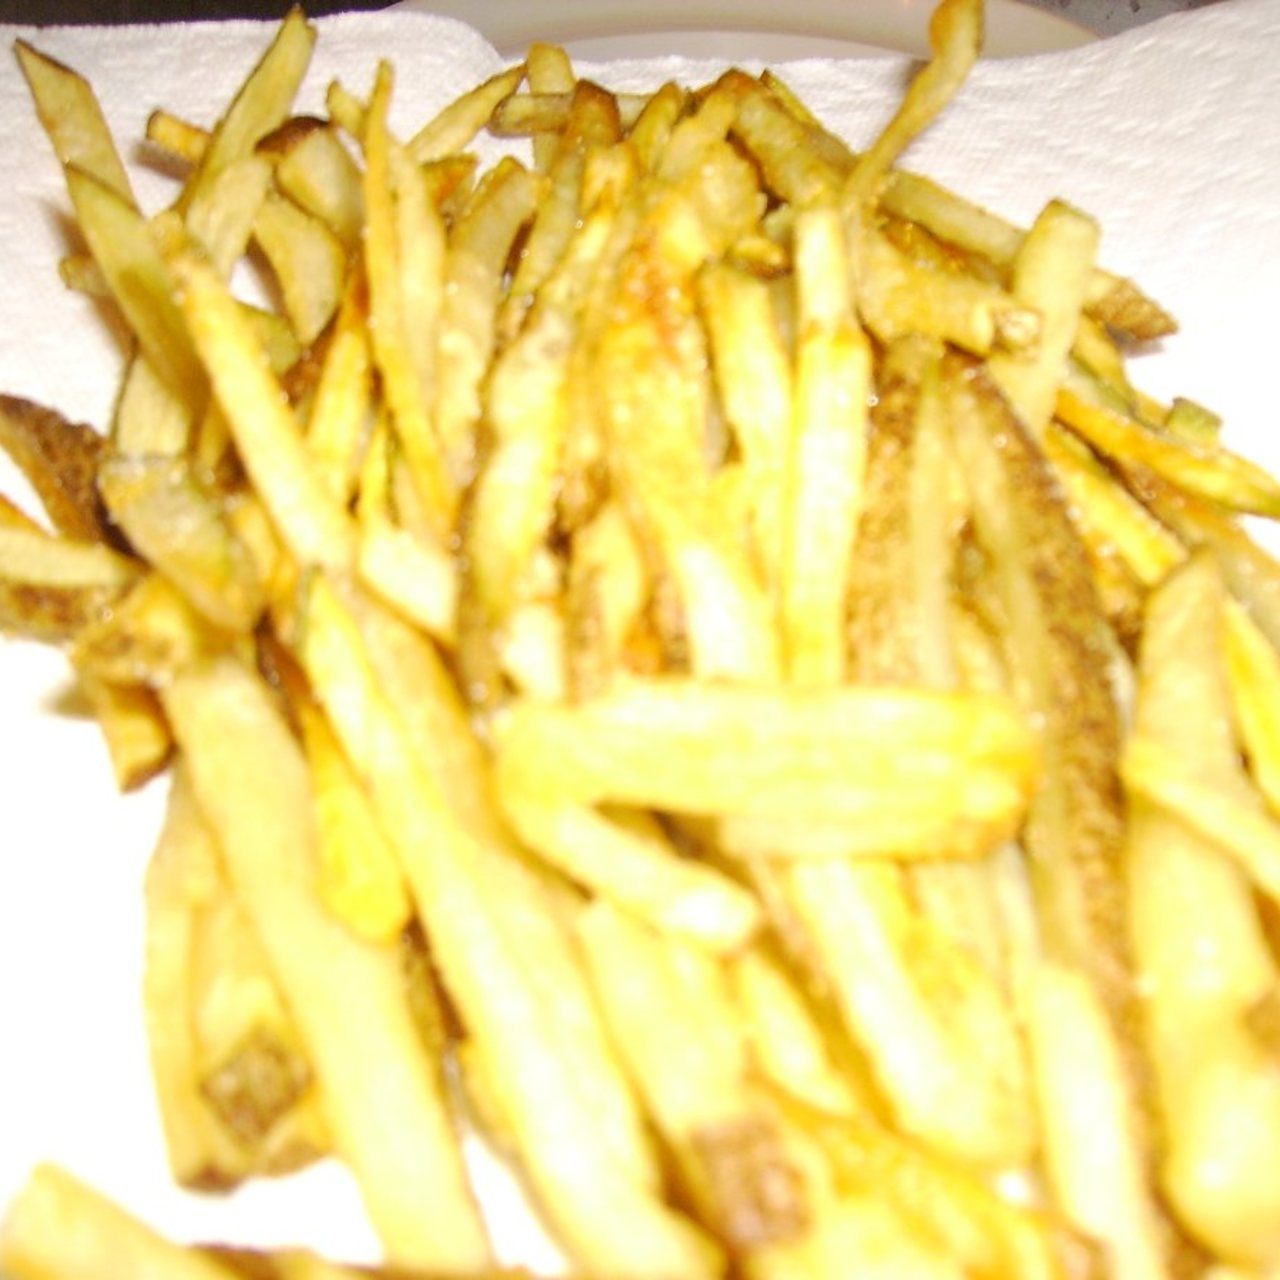 https://bigoven-res.cloudinary.com/image/upload/t_recipe-1280/shoestring-french-fries-3.jpg